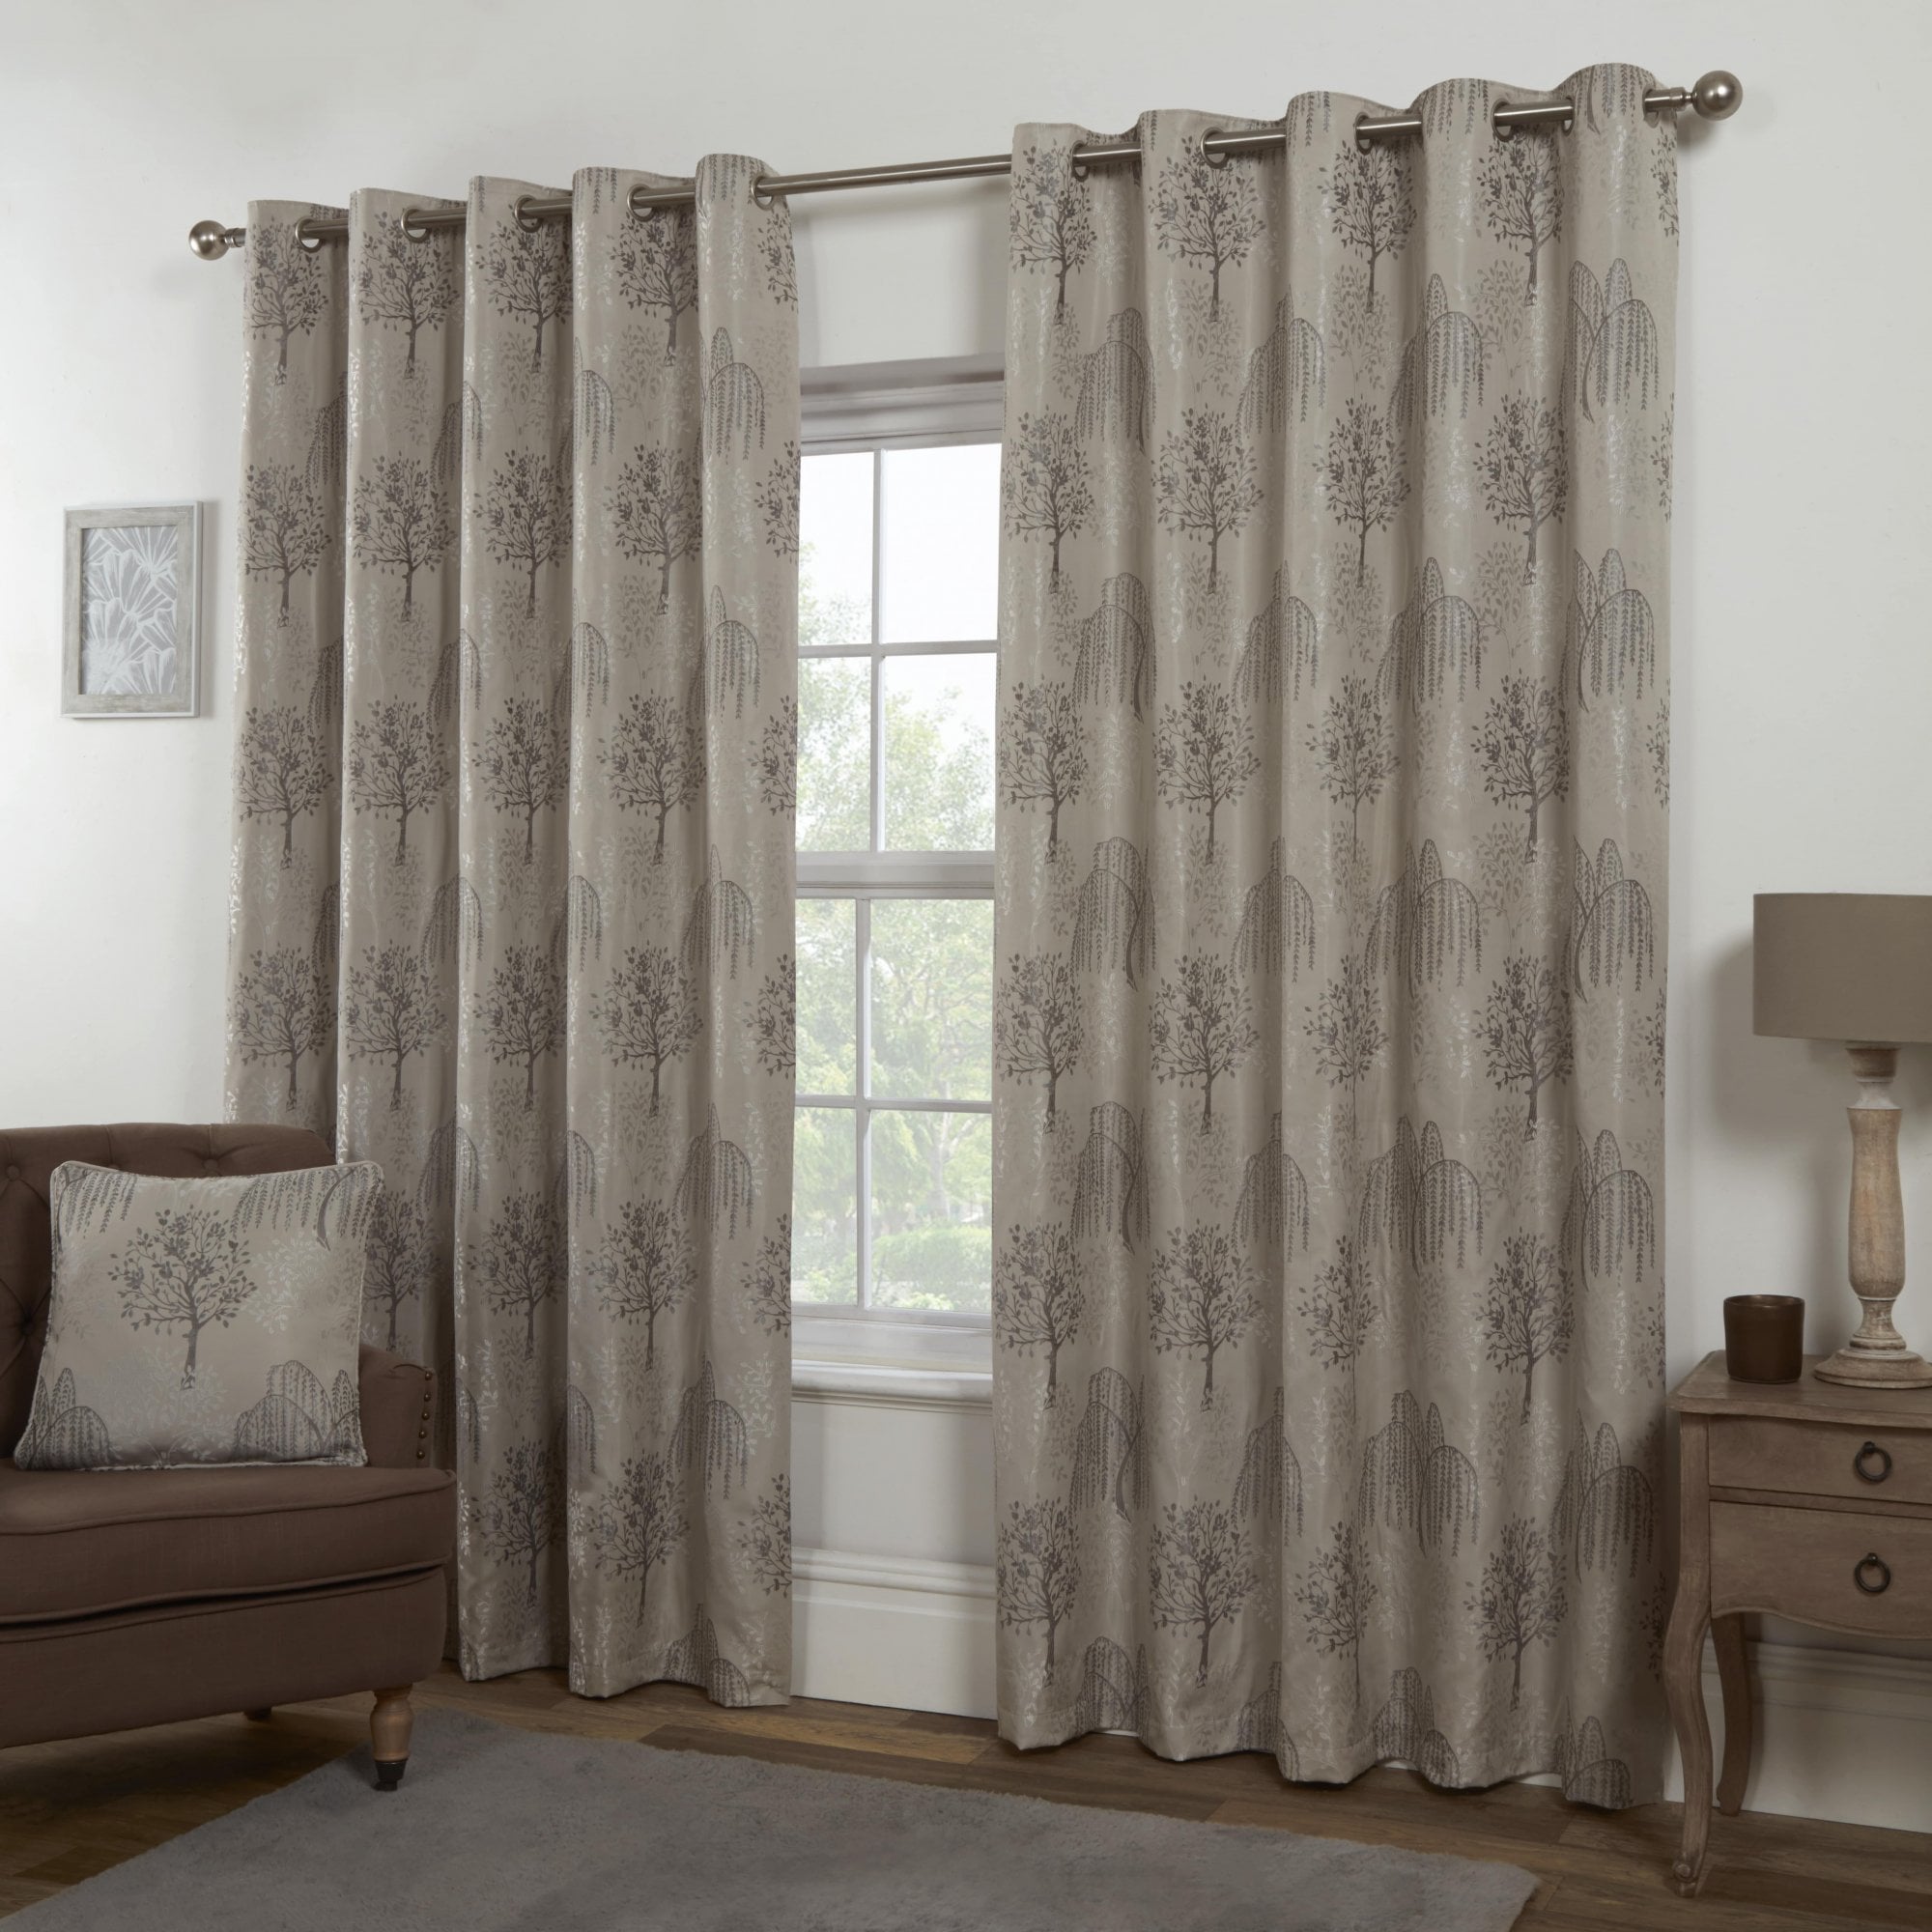 Lewis’s Orchard Patterned Eyelet Curtains - Silver - 167cm (66") X 137cm (54")  | TJ Hughes